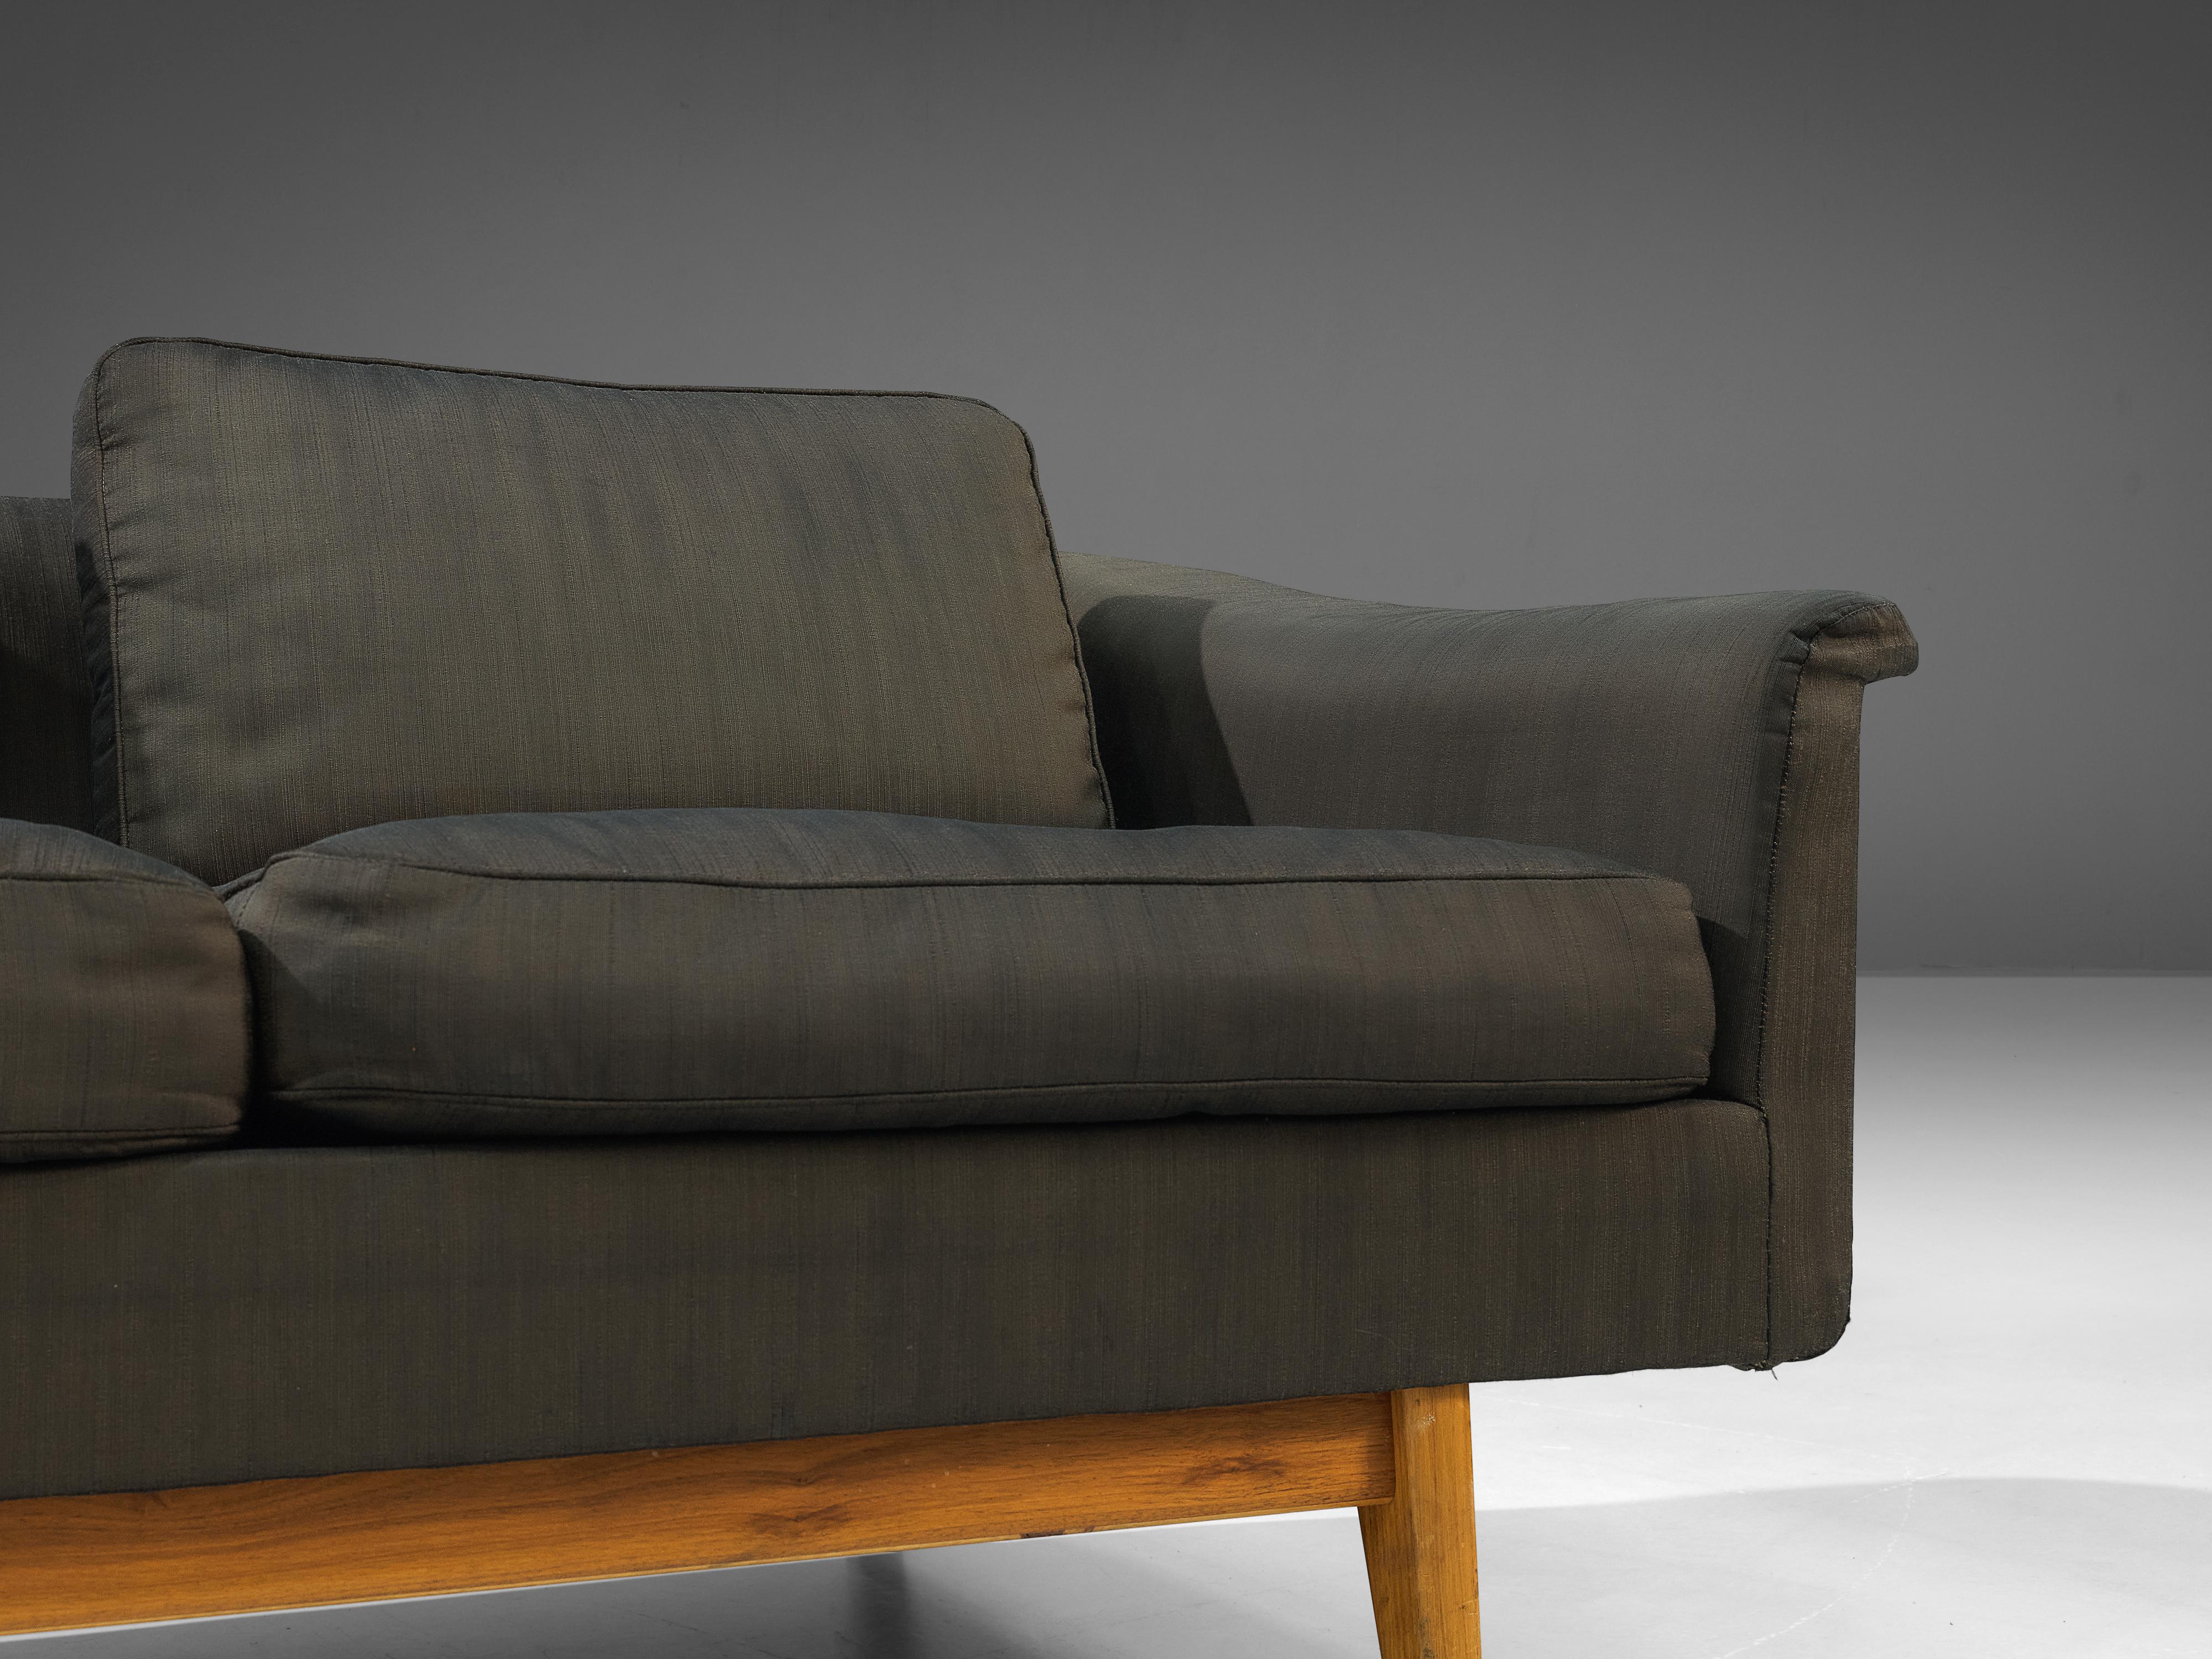 Folke Ohlsson for Dux ‘Passadena’ Sofa in Grey Upholstery and Walnut  For Sale 1